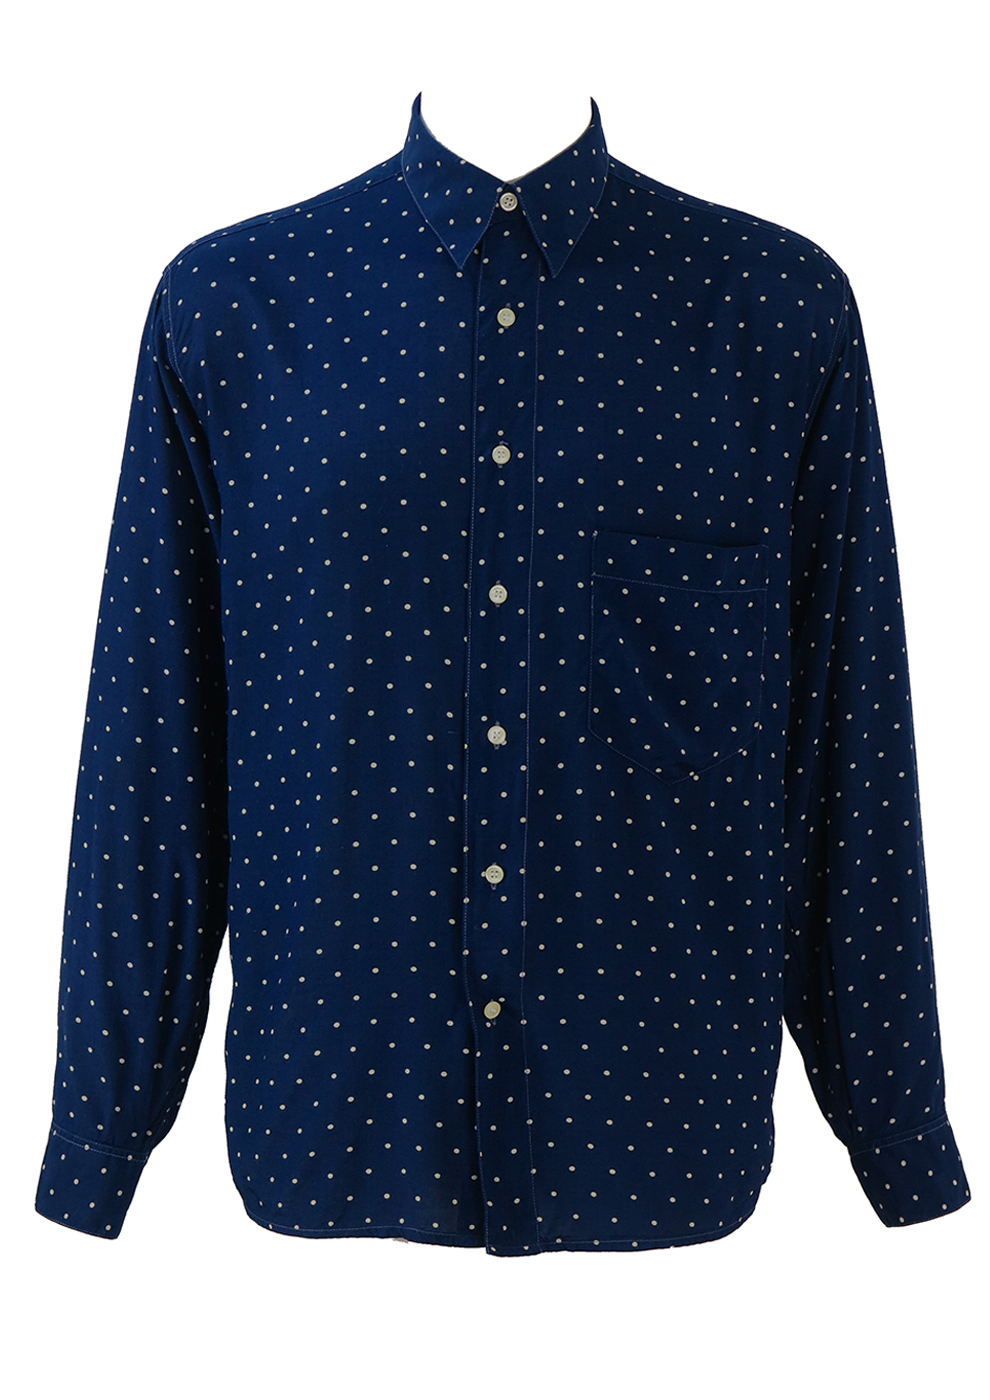 Navy Blue Shirt with White Polka Dots 